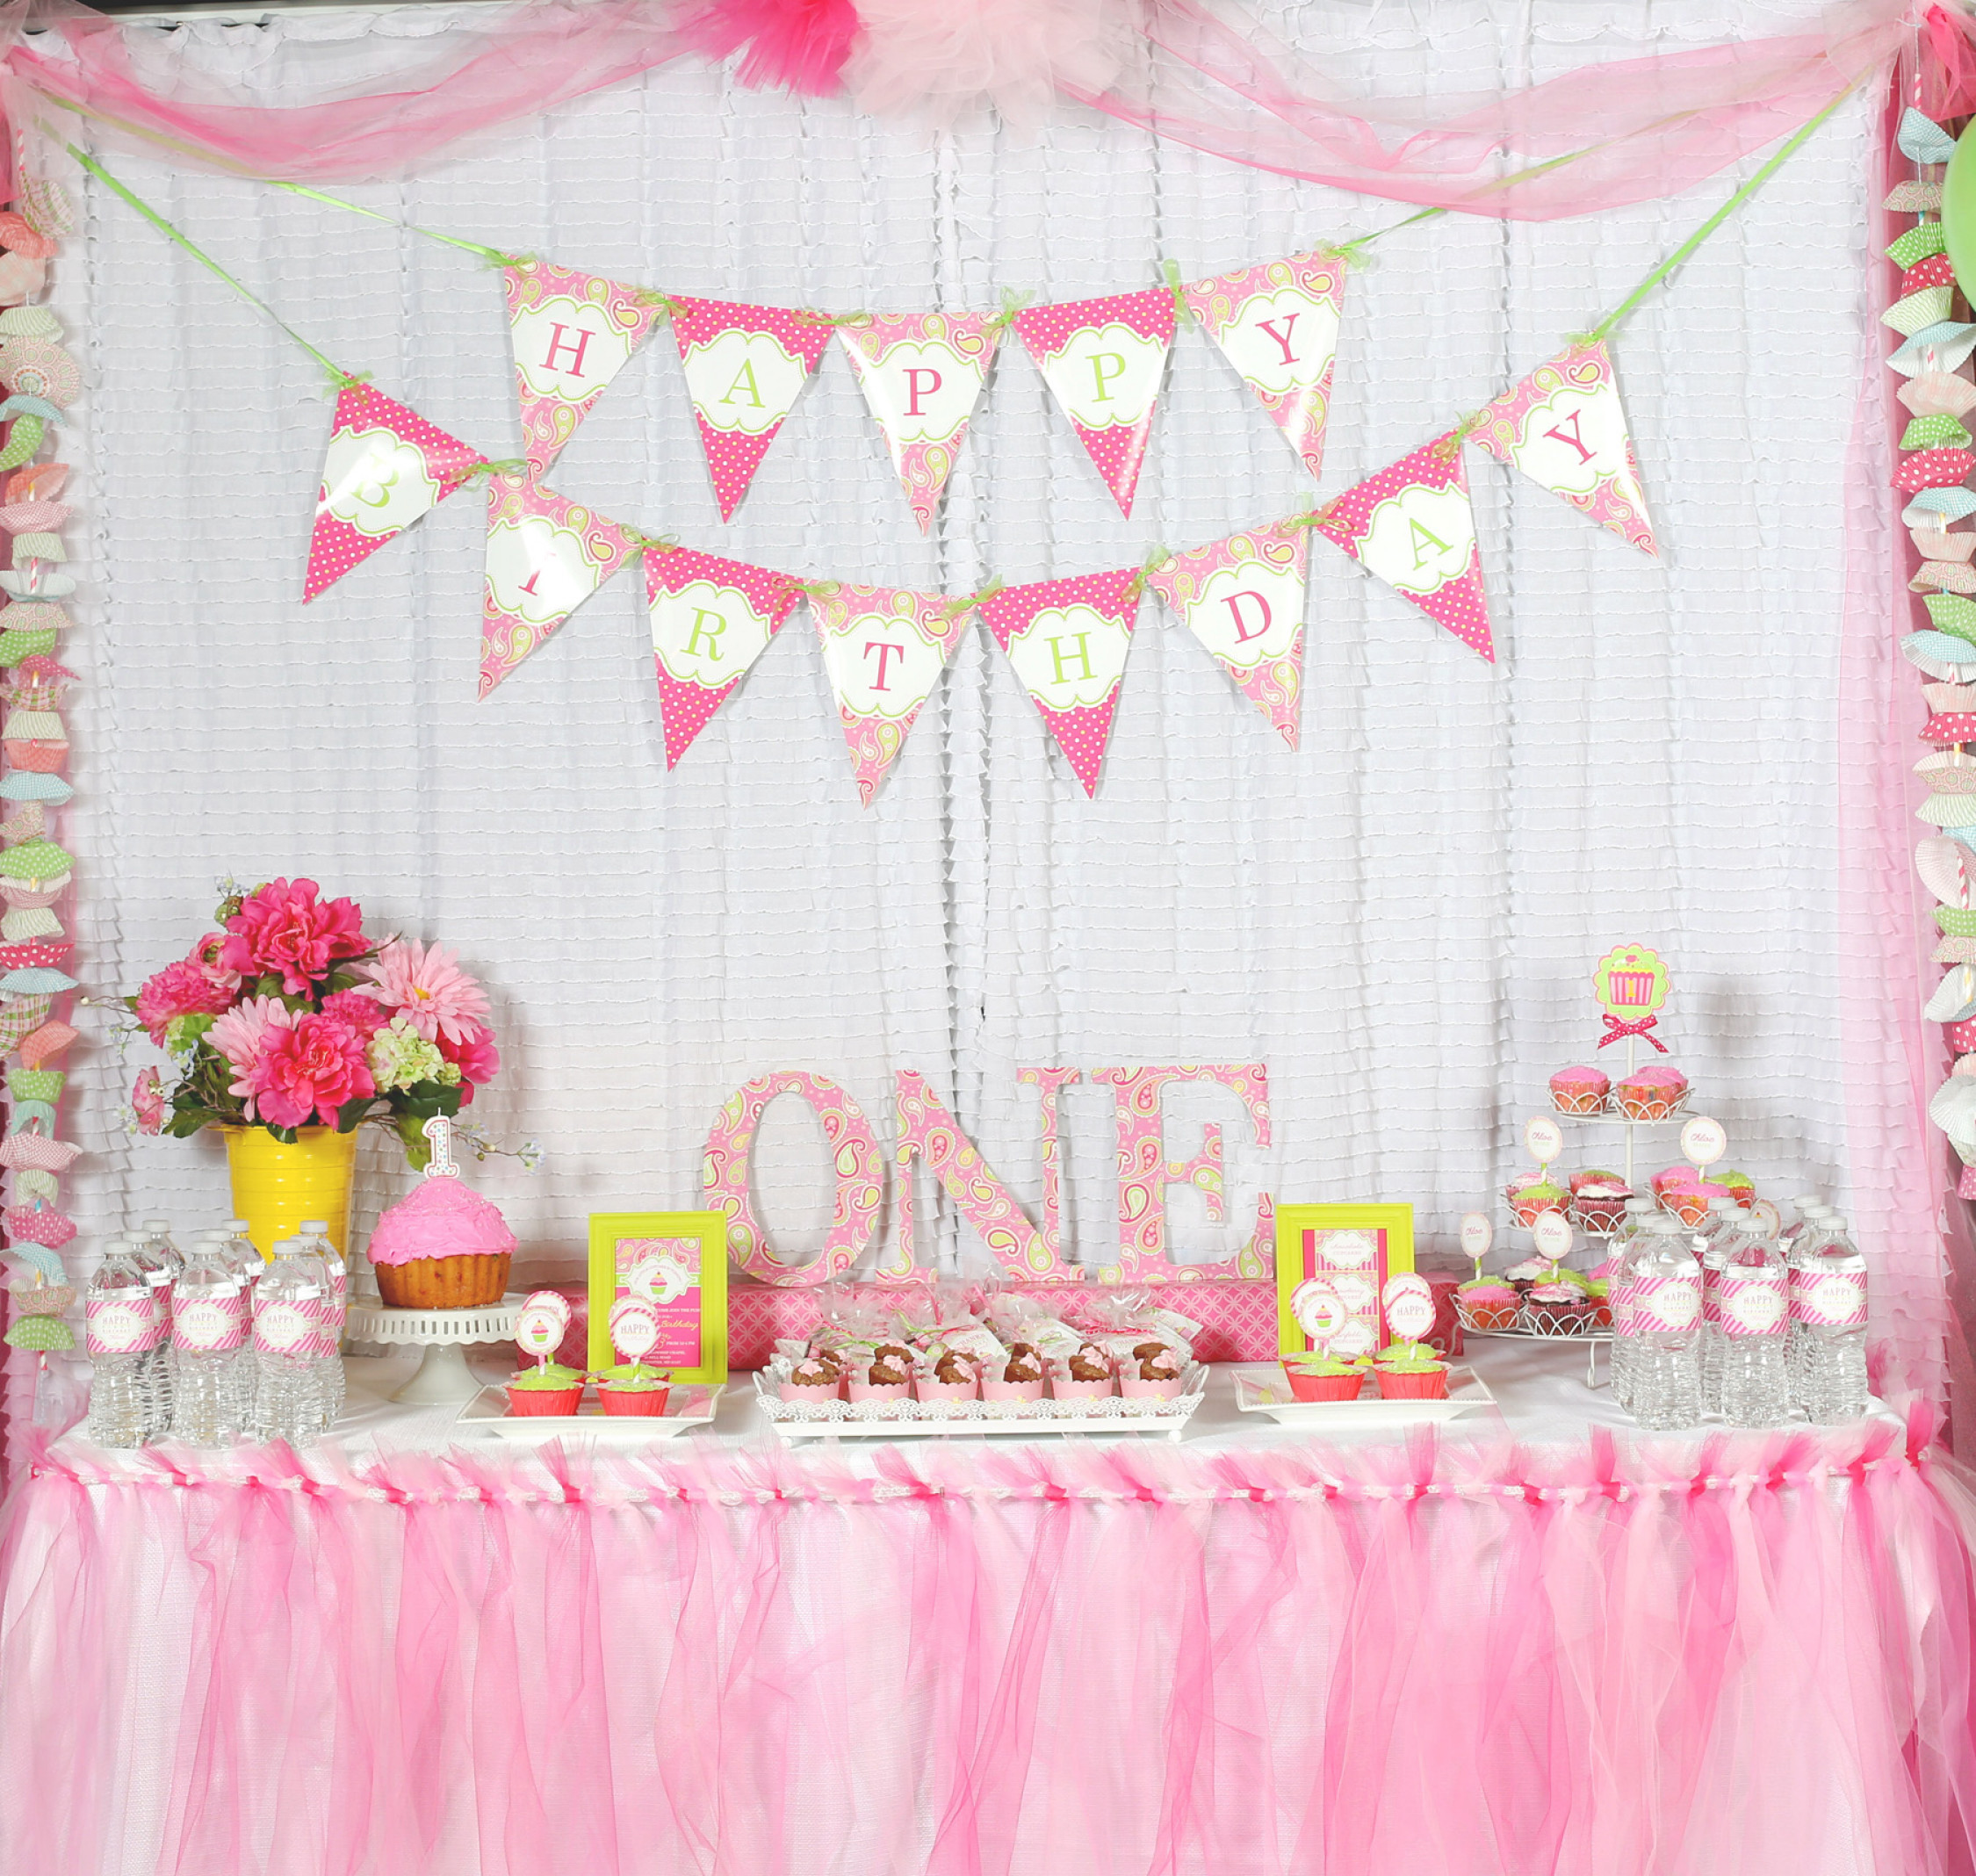 1st Birthday Decorations For Girl
 A Cupcake Themed 1st Birthday party with Paisley and Polka